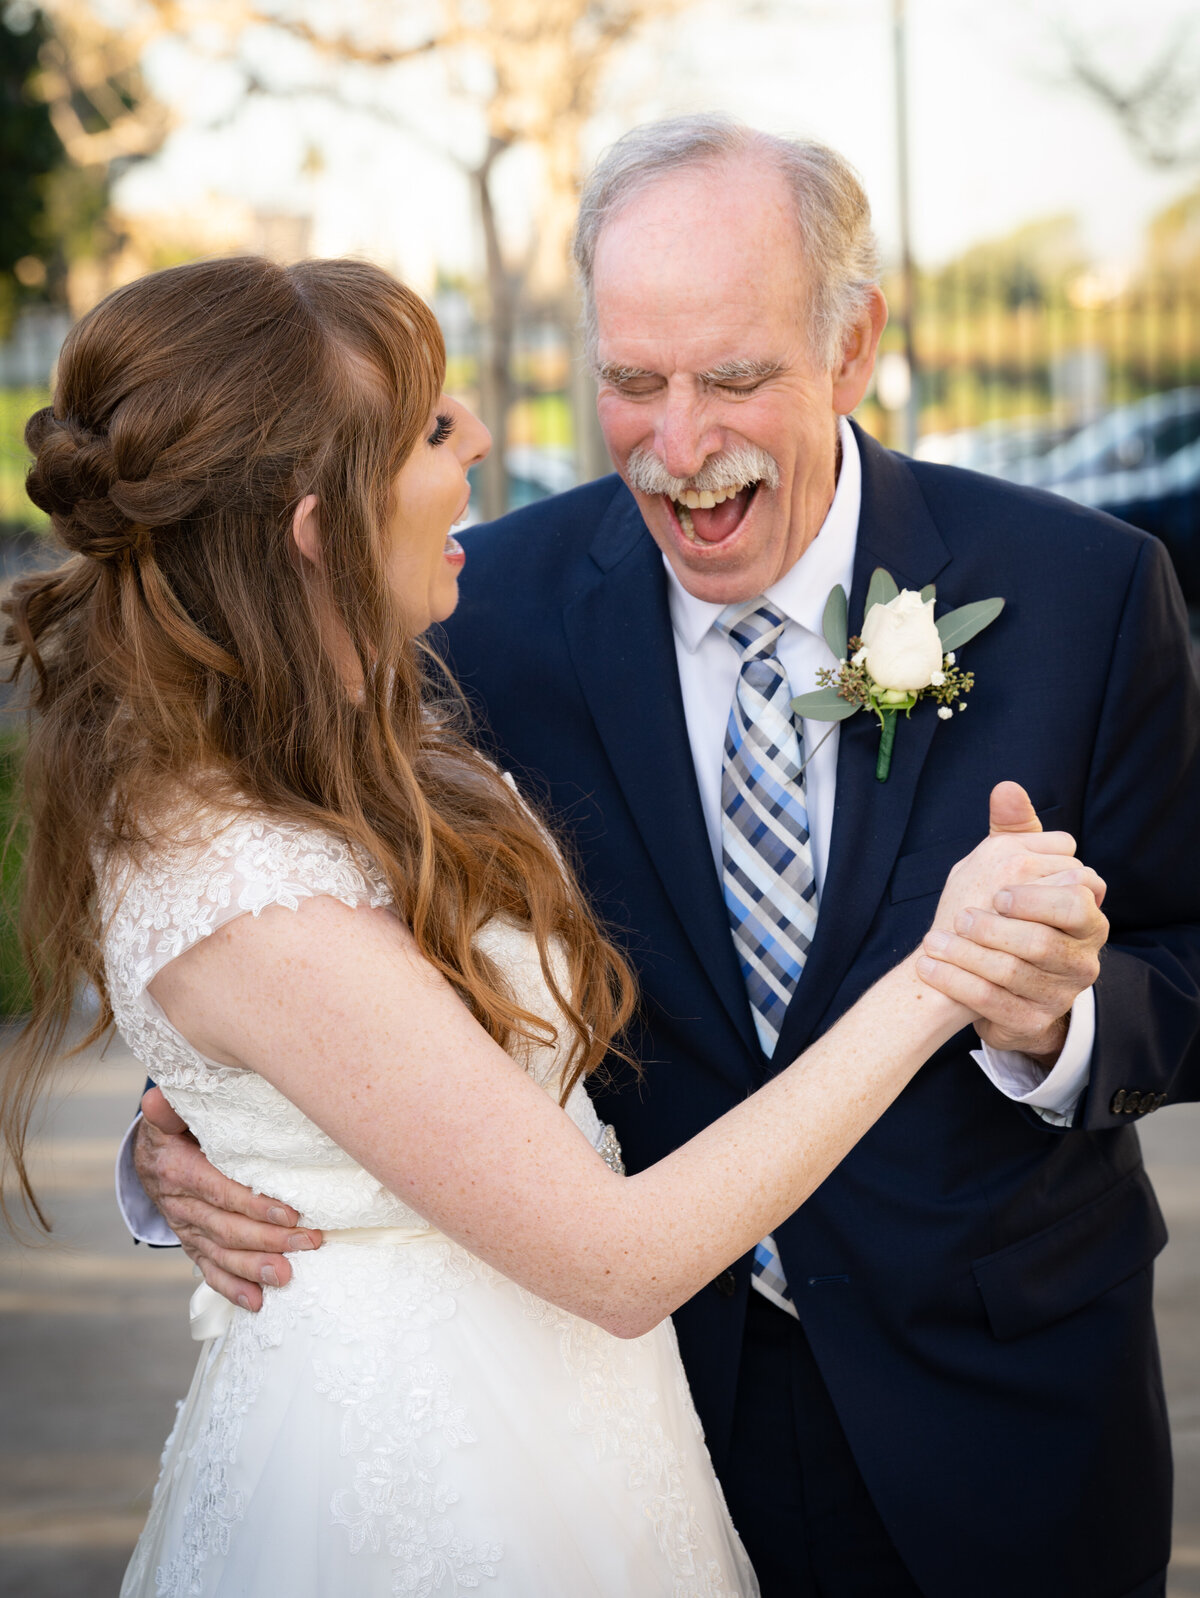 Elderly father in a navy suit with white-rose boutonniere holds red-headed daughter and laughs heartily with her during their special dance at her wedding. Photo by SAVI Photography - San Diego California Photographer